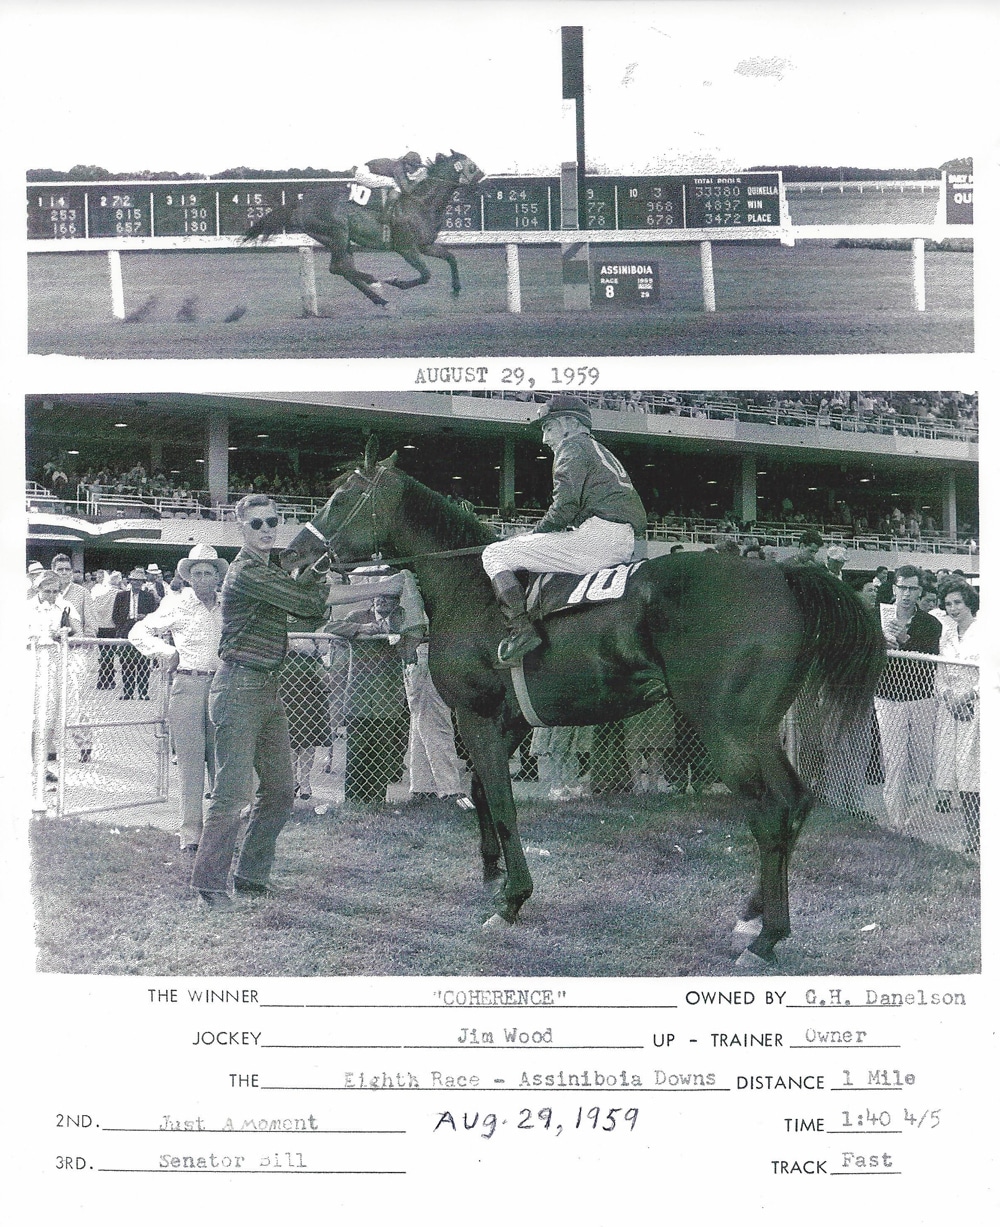 Coherence. August 29, 1959. Trainer Gary Danelson's first win.